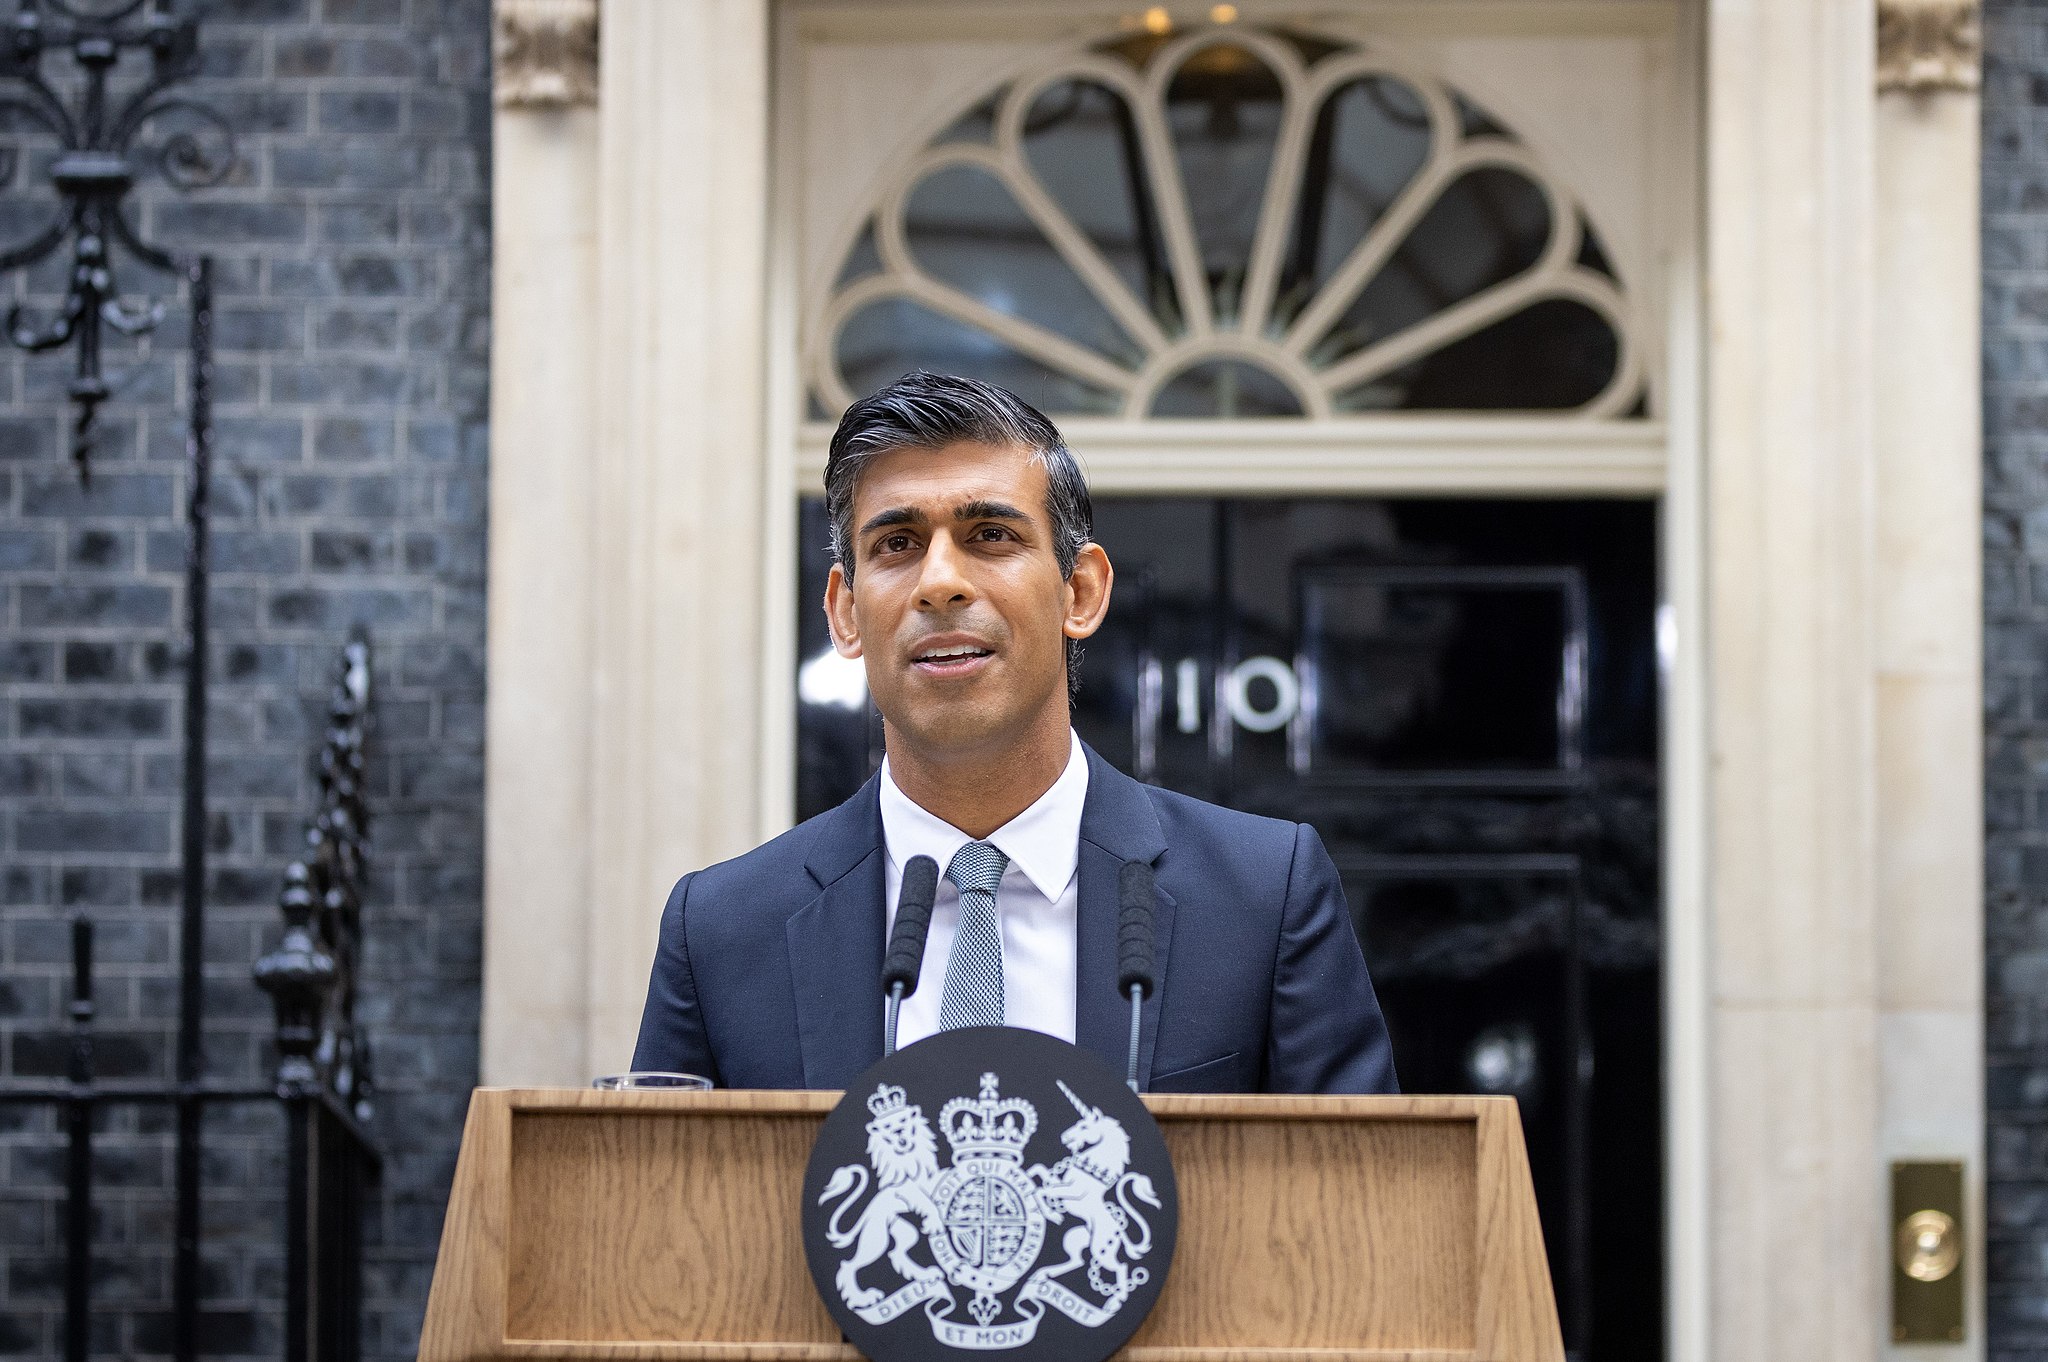 UK investigator concludes PM Rishi Sunak breached conduct rules for failing to declare interest